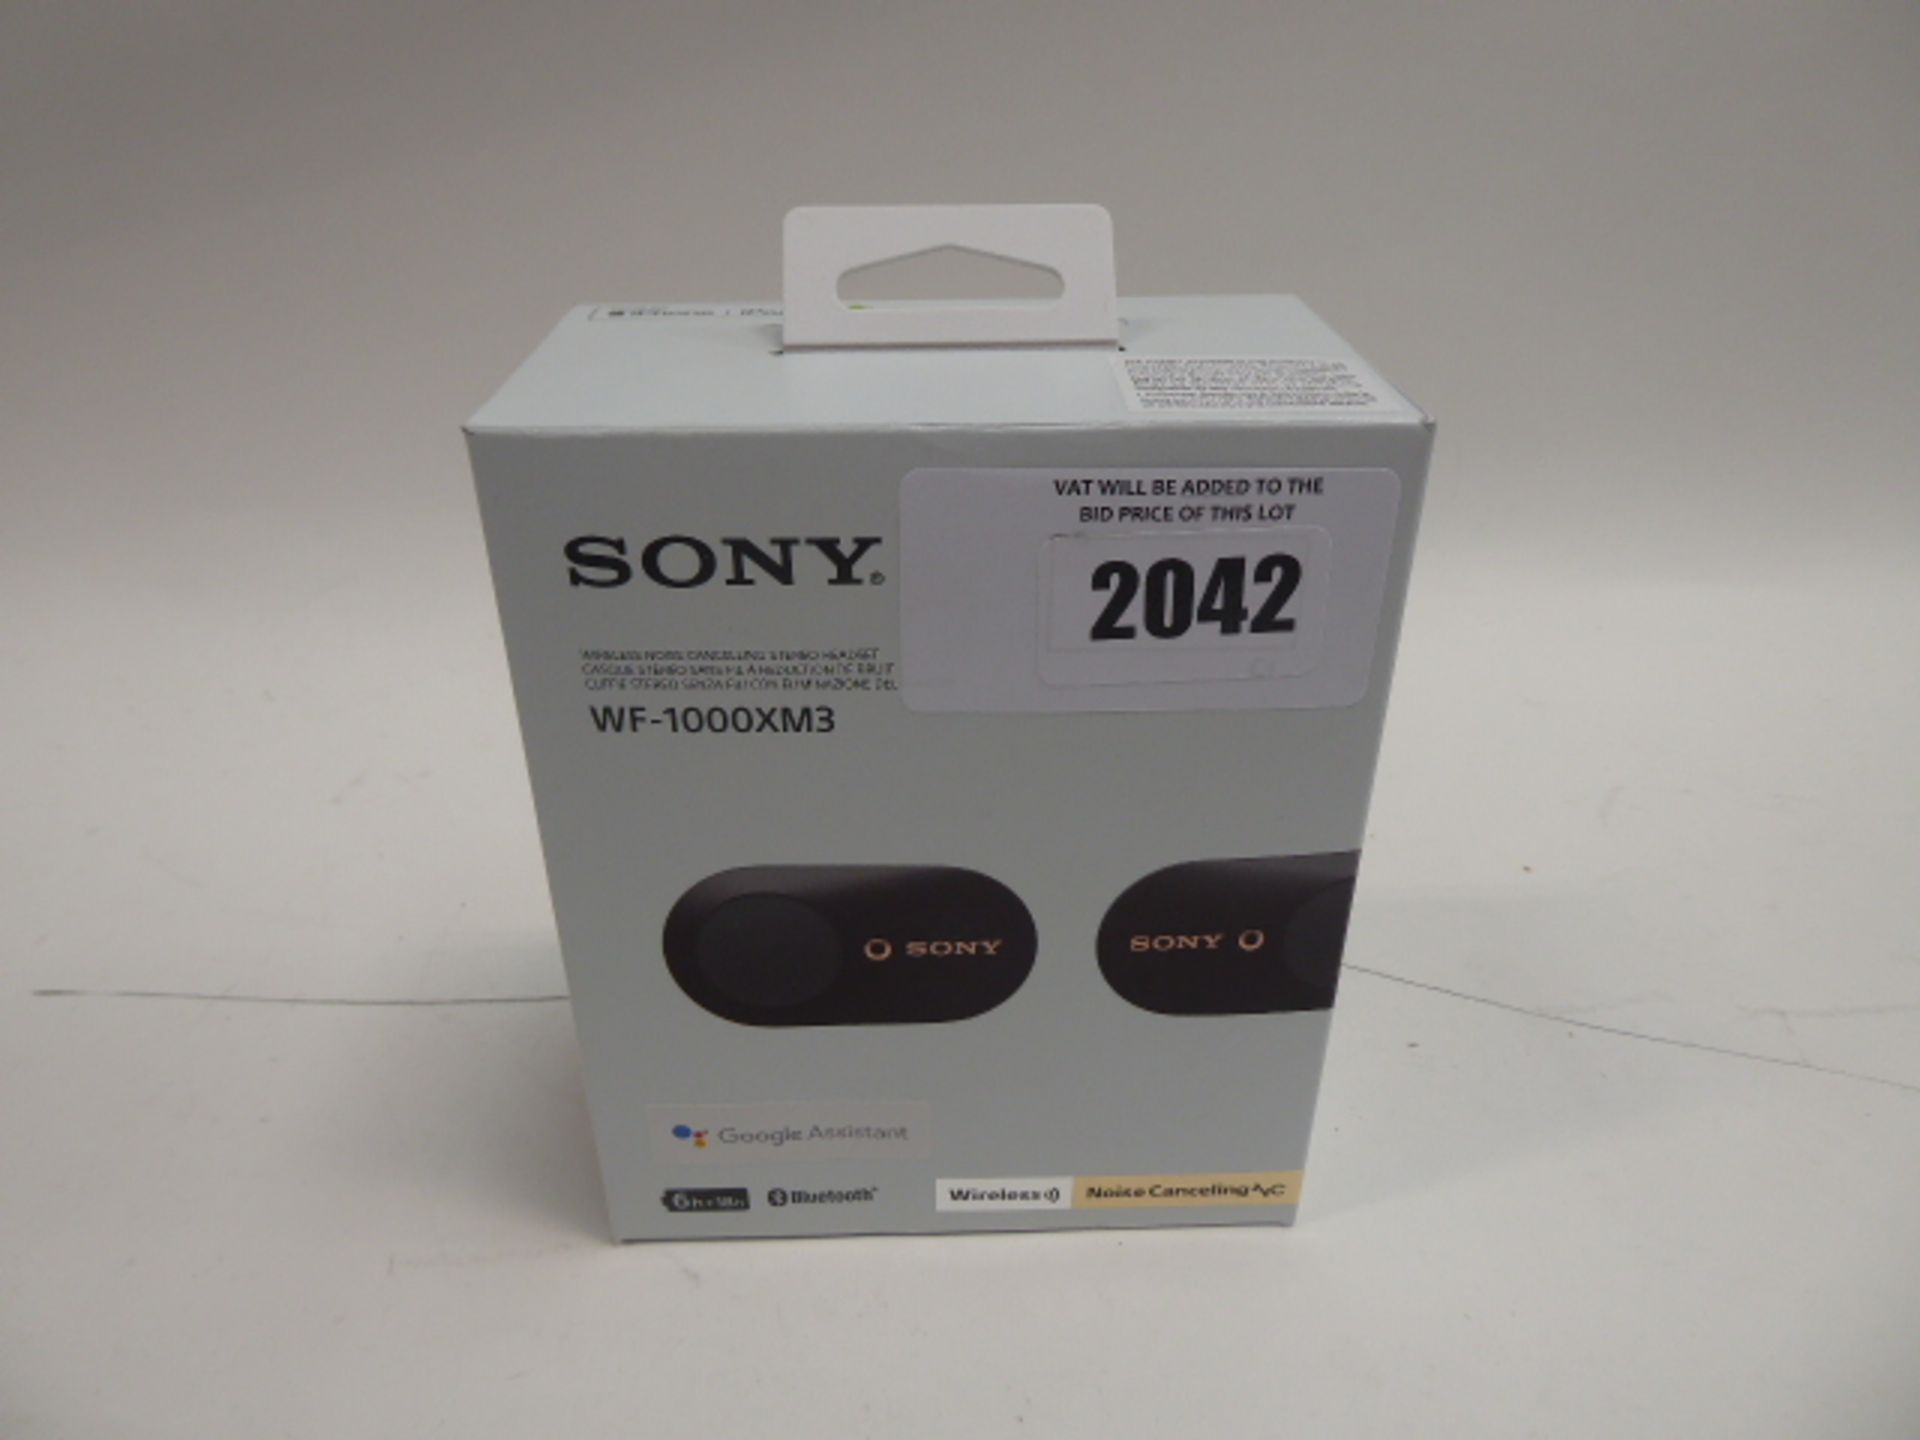 Sony WF-1000XM3 wireless noise cancelling earphones with box